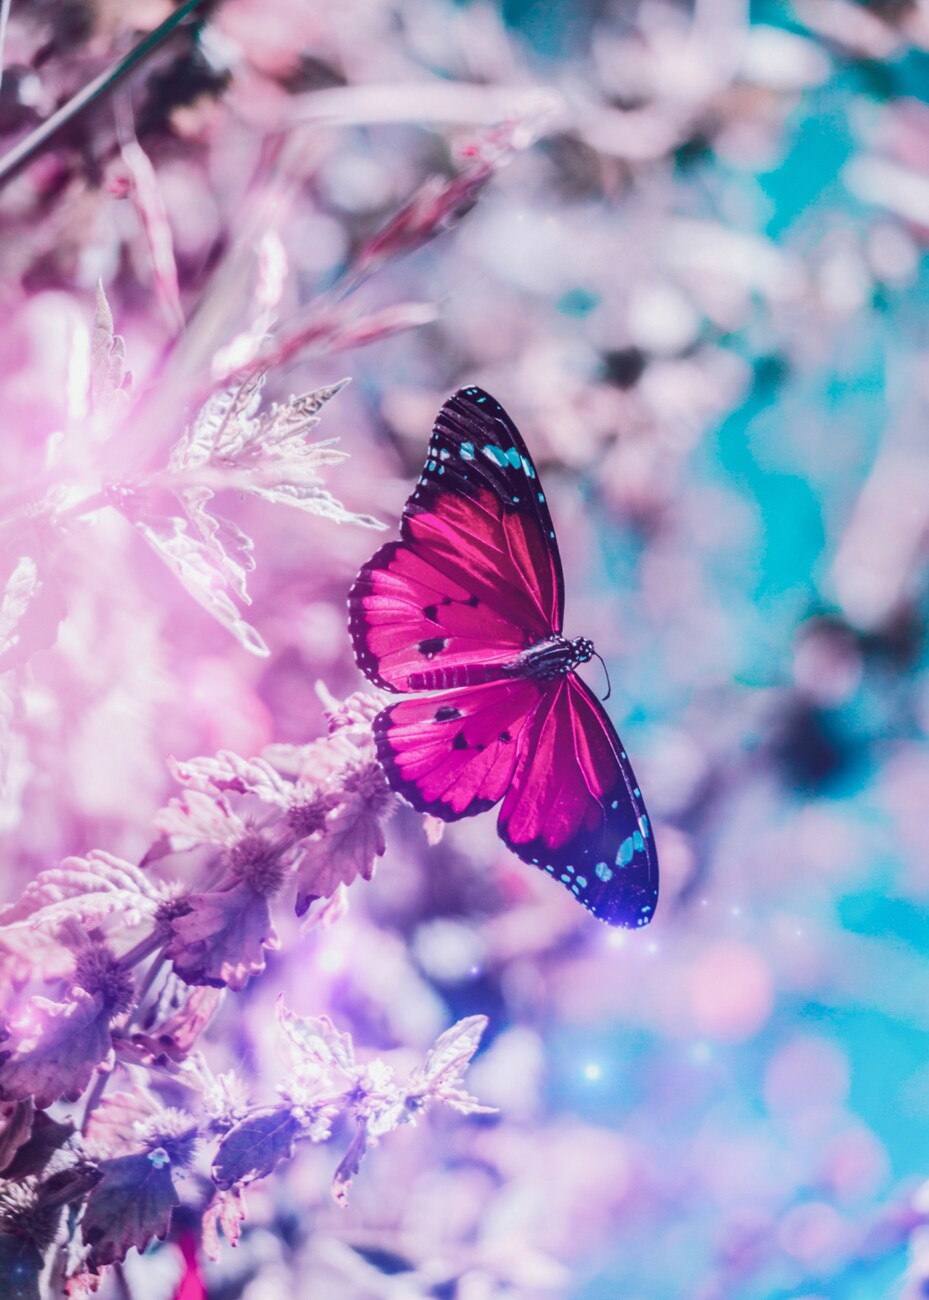 1887 Pink Butterfly Wall Paper Images Stock Photos  Vectors   Shutterstock